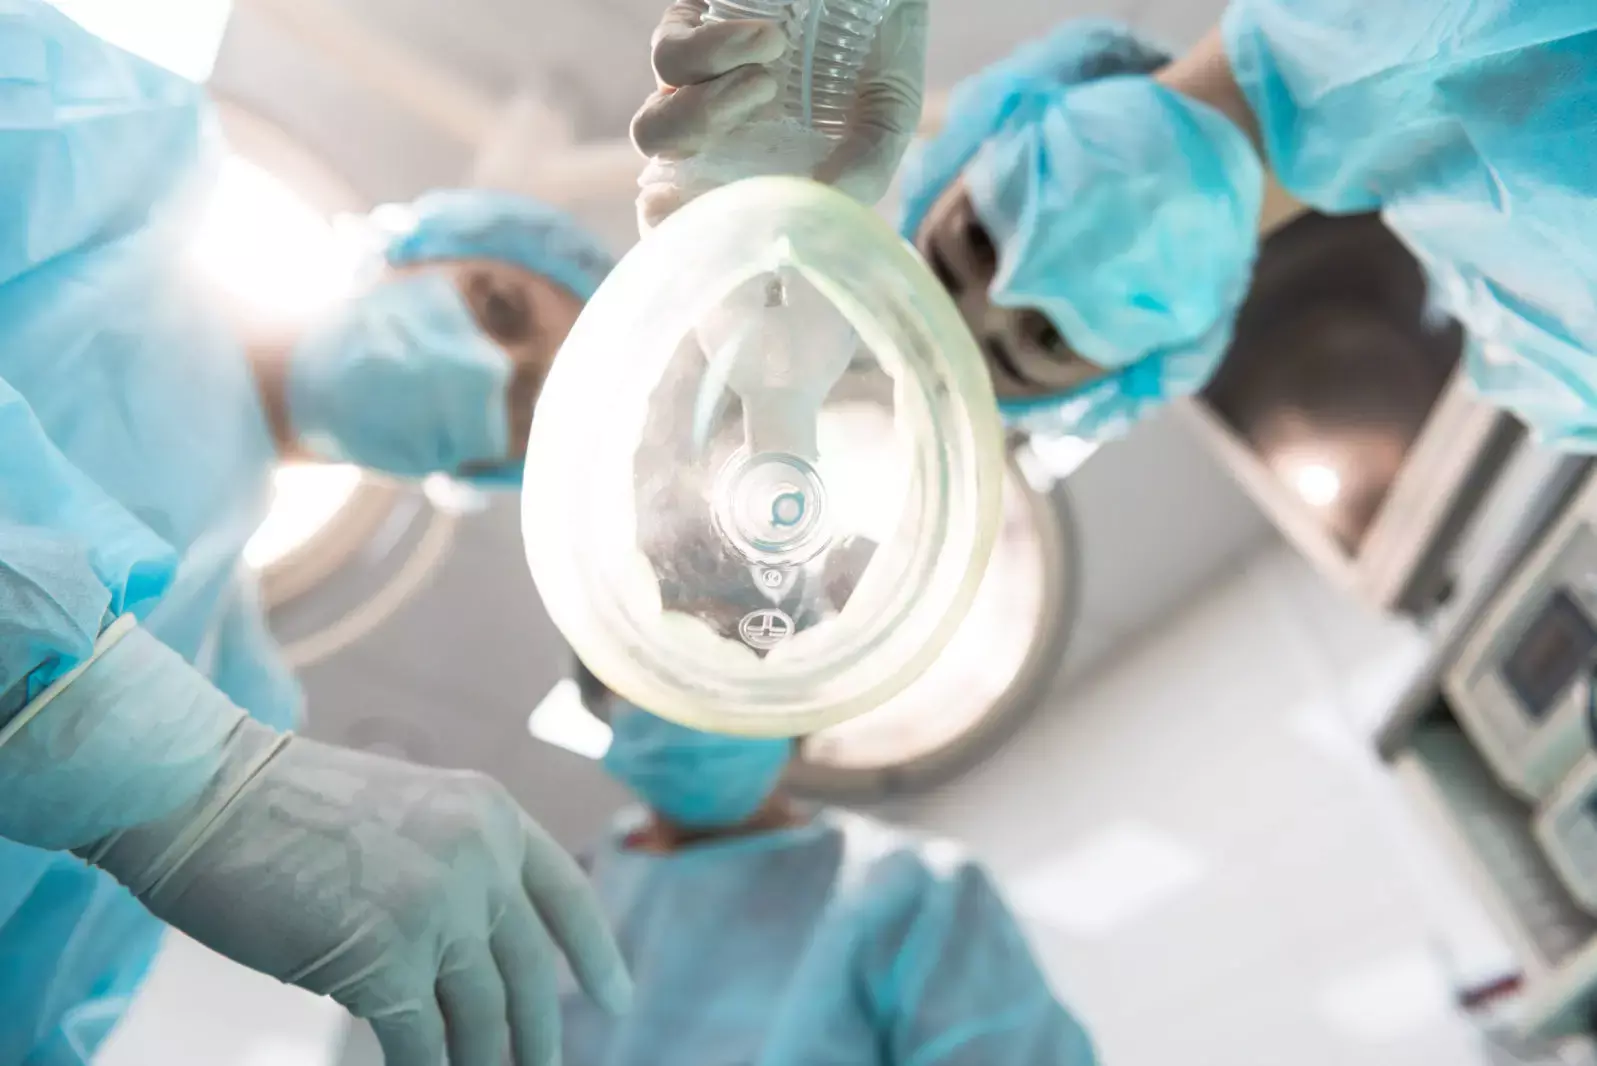 Complete Anesthesia Handover Is Linked With Unfavourable Outcomes During CV Surgery